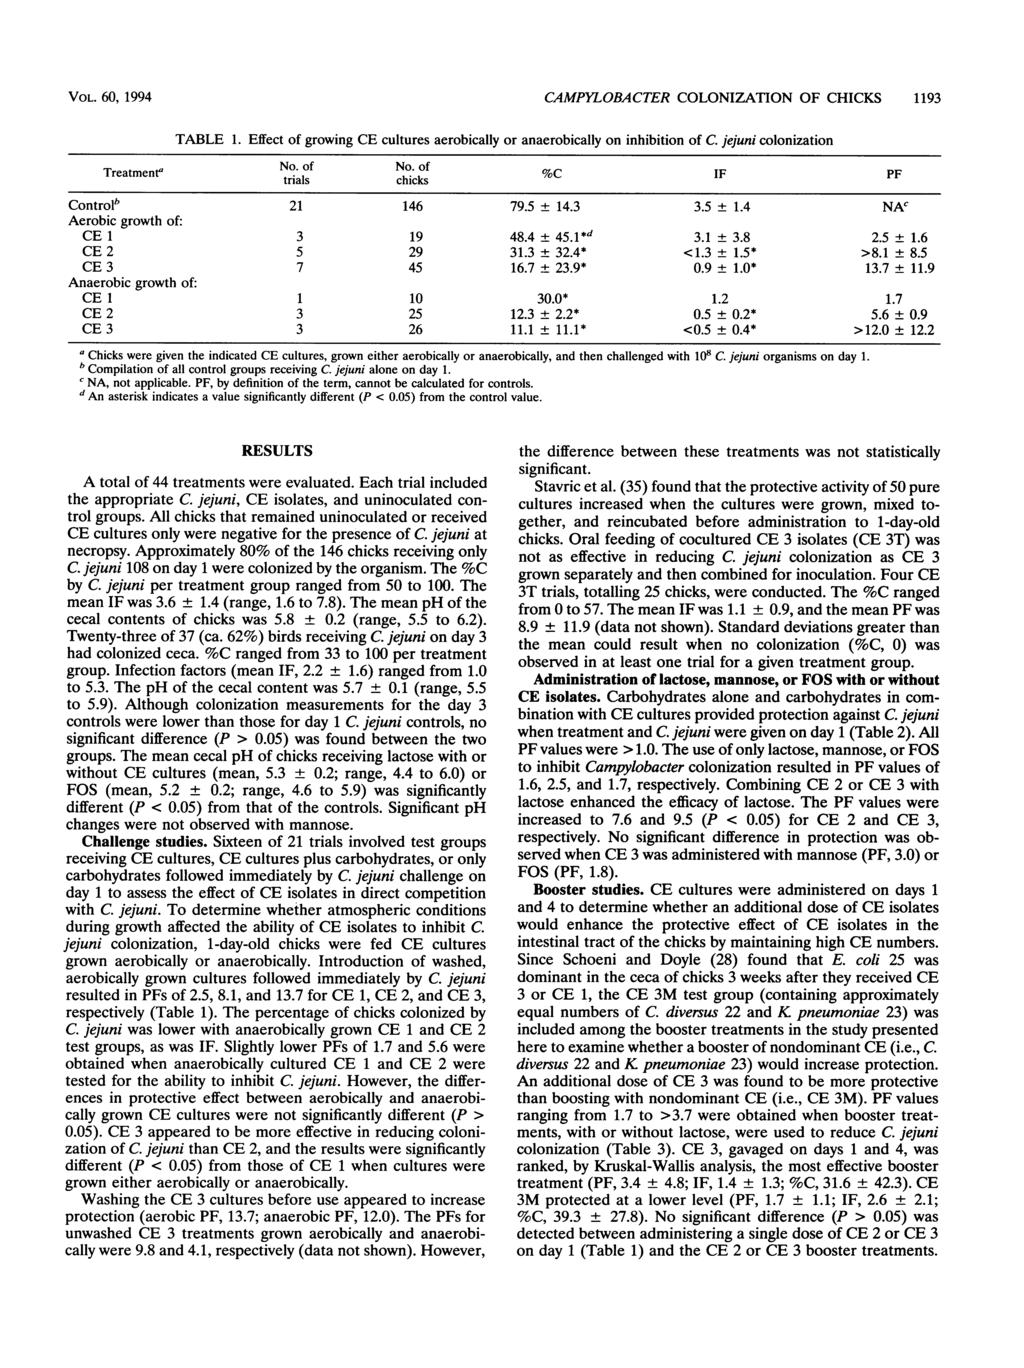 VOL. 60, 1994 CAMPYLOBACTER COLONIZATION OF CHICKS 1193 TABLE 1. Effect of growing CE cultures aerobically or anaerobically on inhibition of C jejuni colonization Treatment" No. of No.